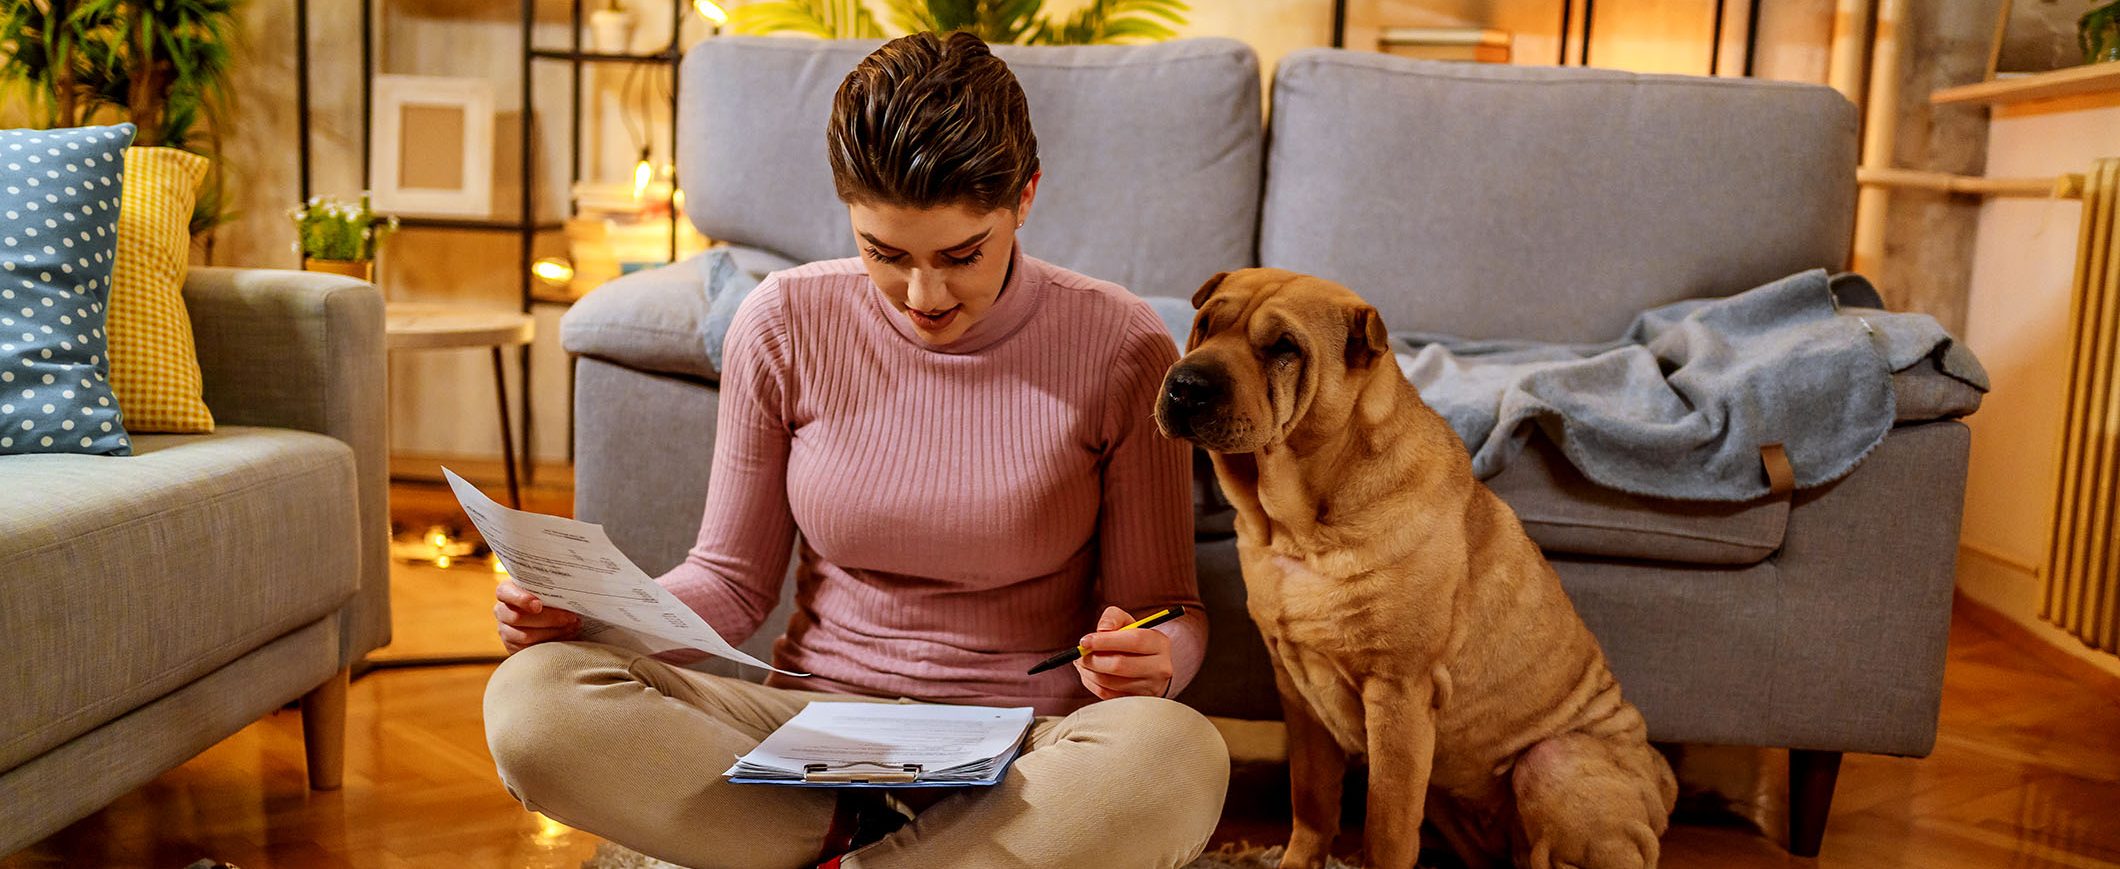 A woman sits with her dog on the floor of her living room, reviewing documents.